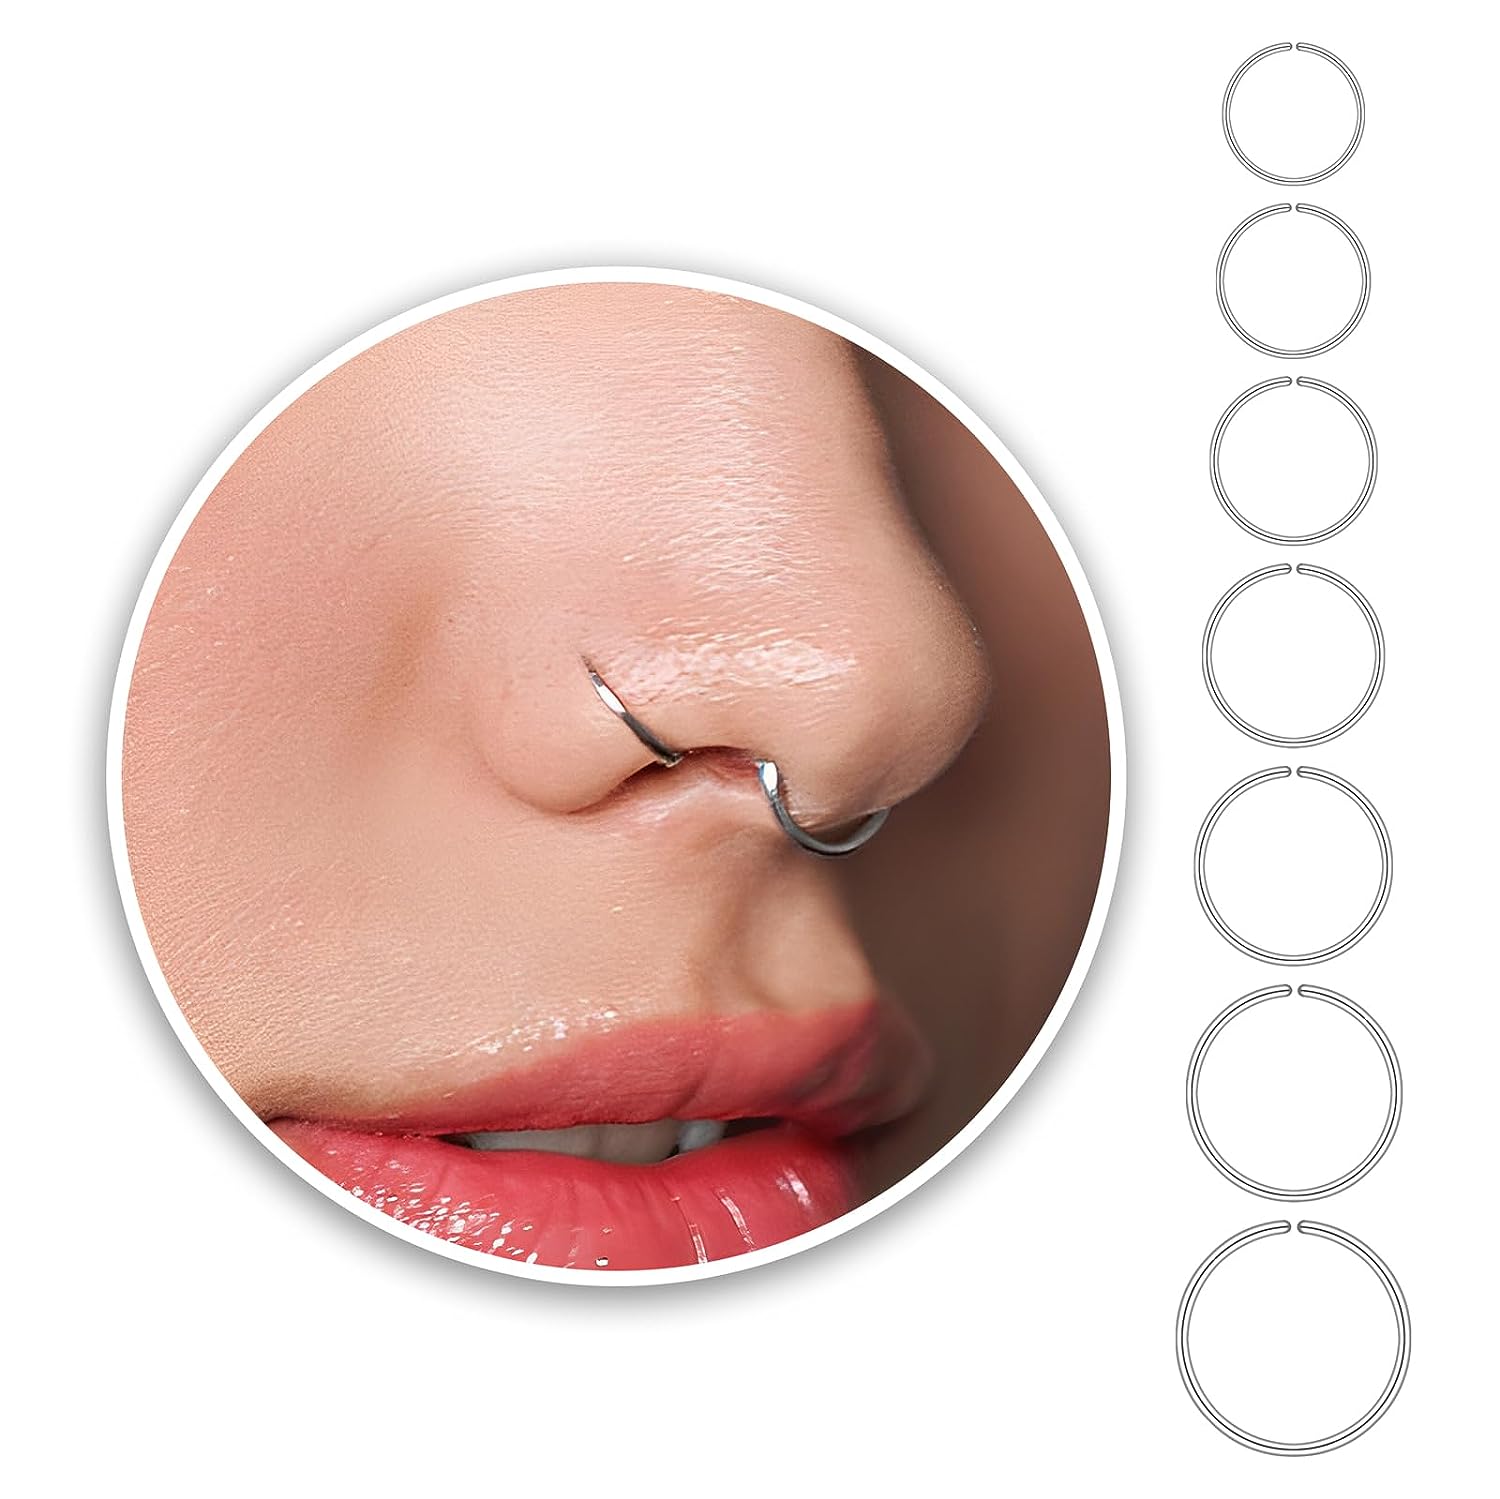 sterling silver nose rings on the woman's nose